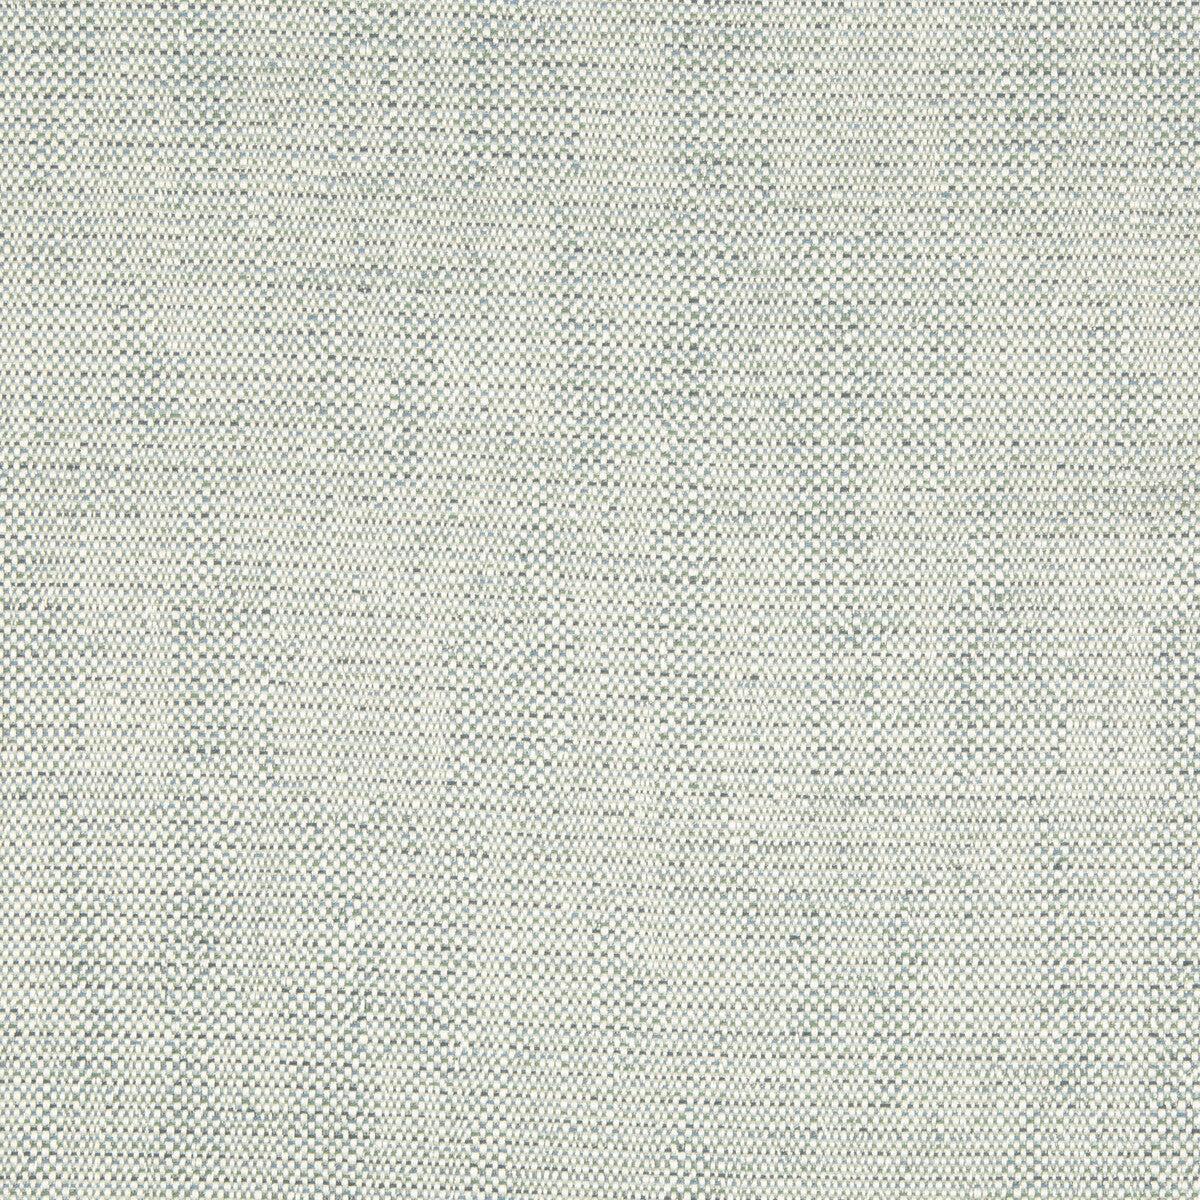 Kravet Contract fabric in 34768-5 color - pattern 34768.5.0 - by Kravet Contract in the Gis collection